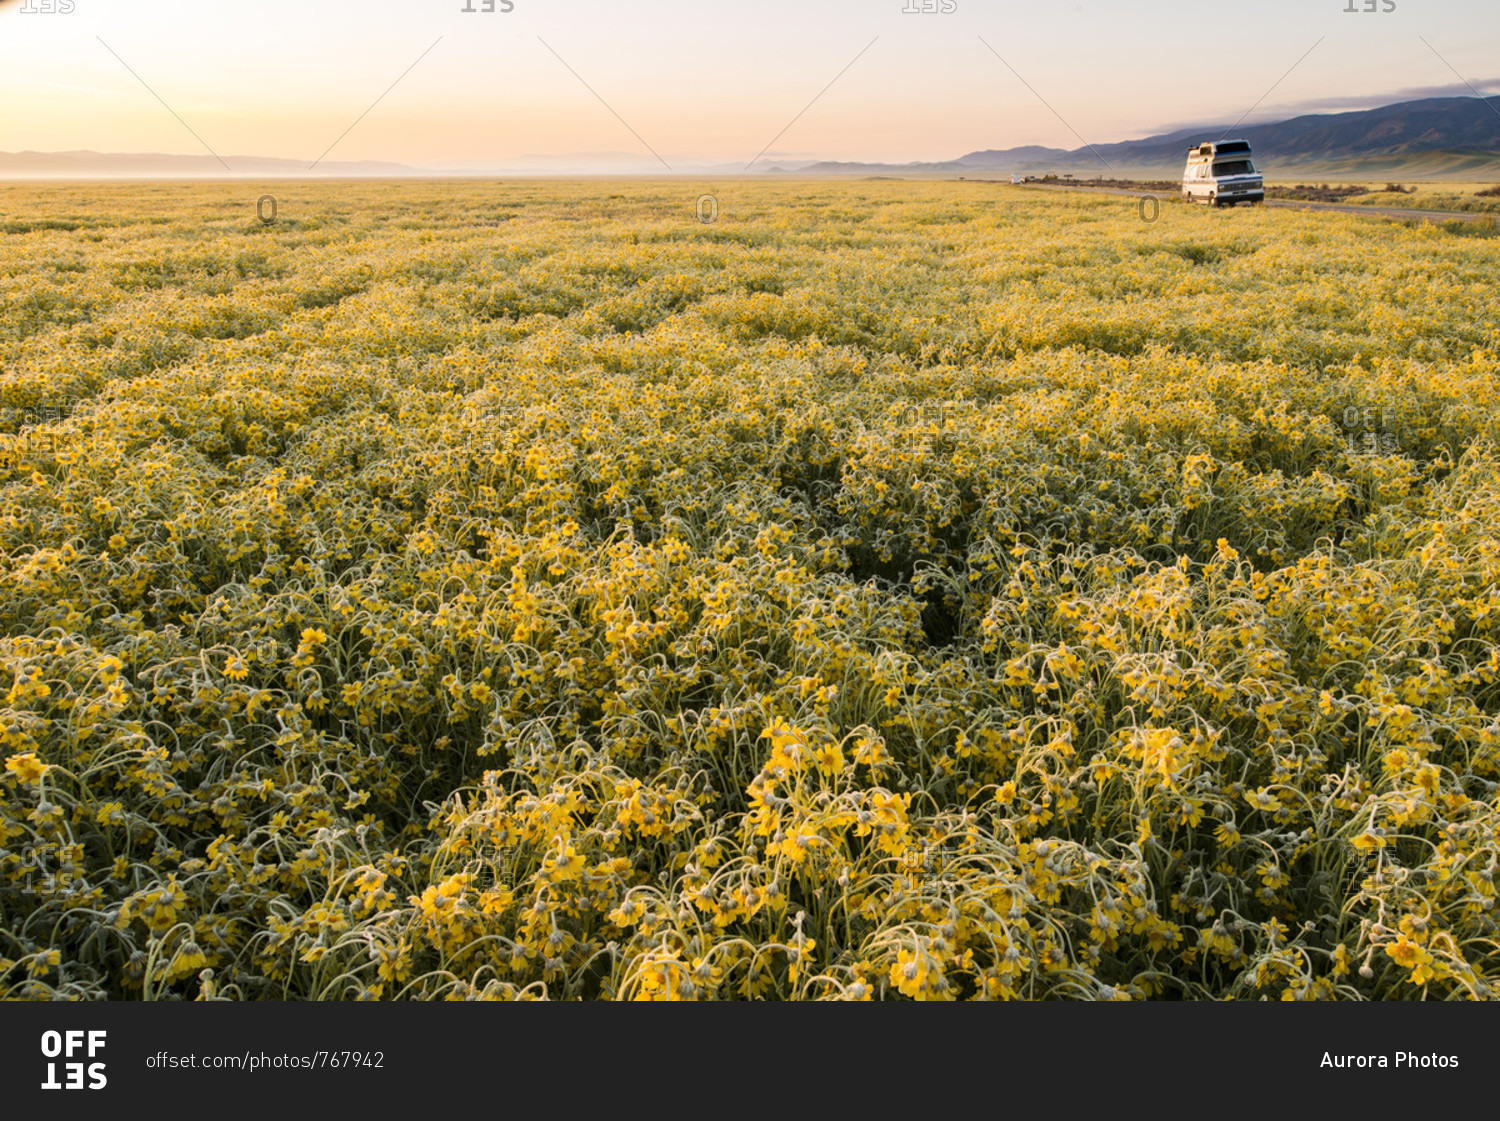 Scenic landscape with field of yellow wildflowers,?Carrizo?Plain National Monument, California, USA